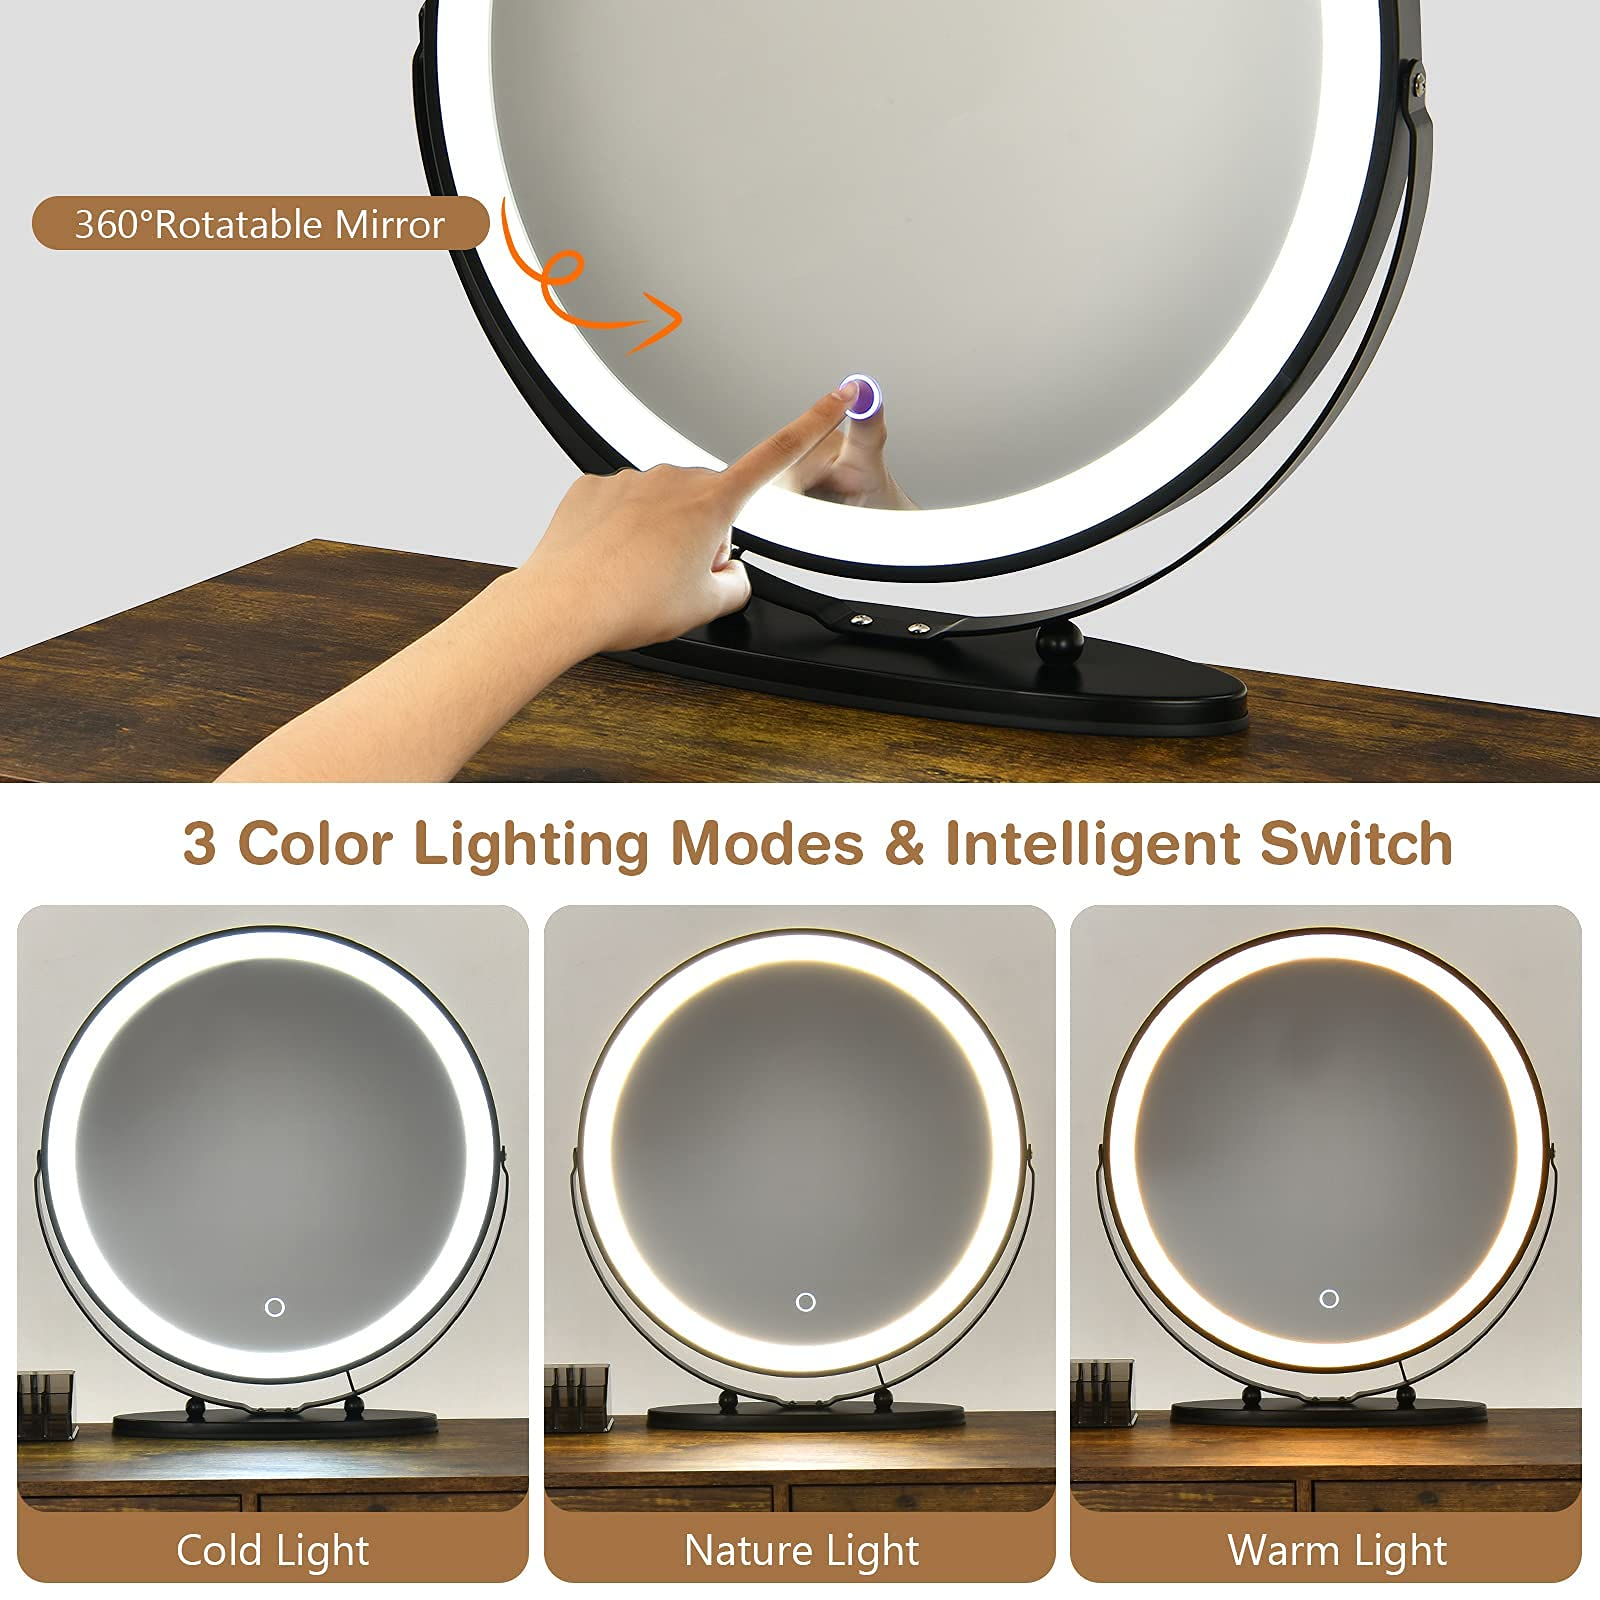 CHARMAID Vanity Set with 3 Colors Lighted Mirror, Left or Right Side Cabinet